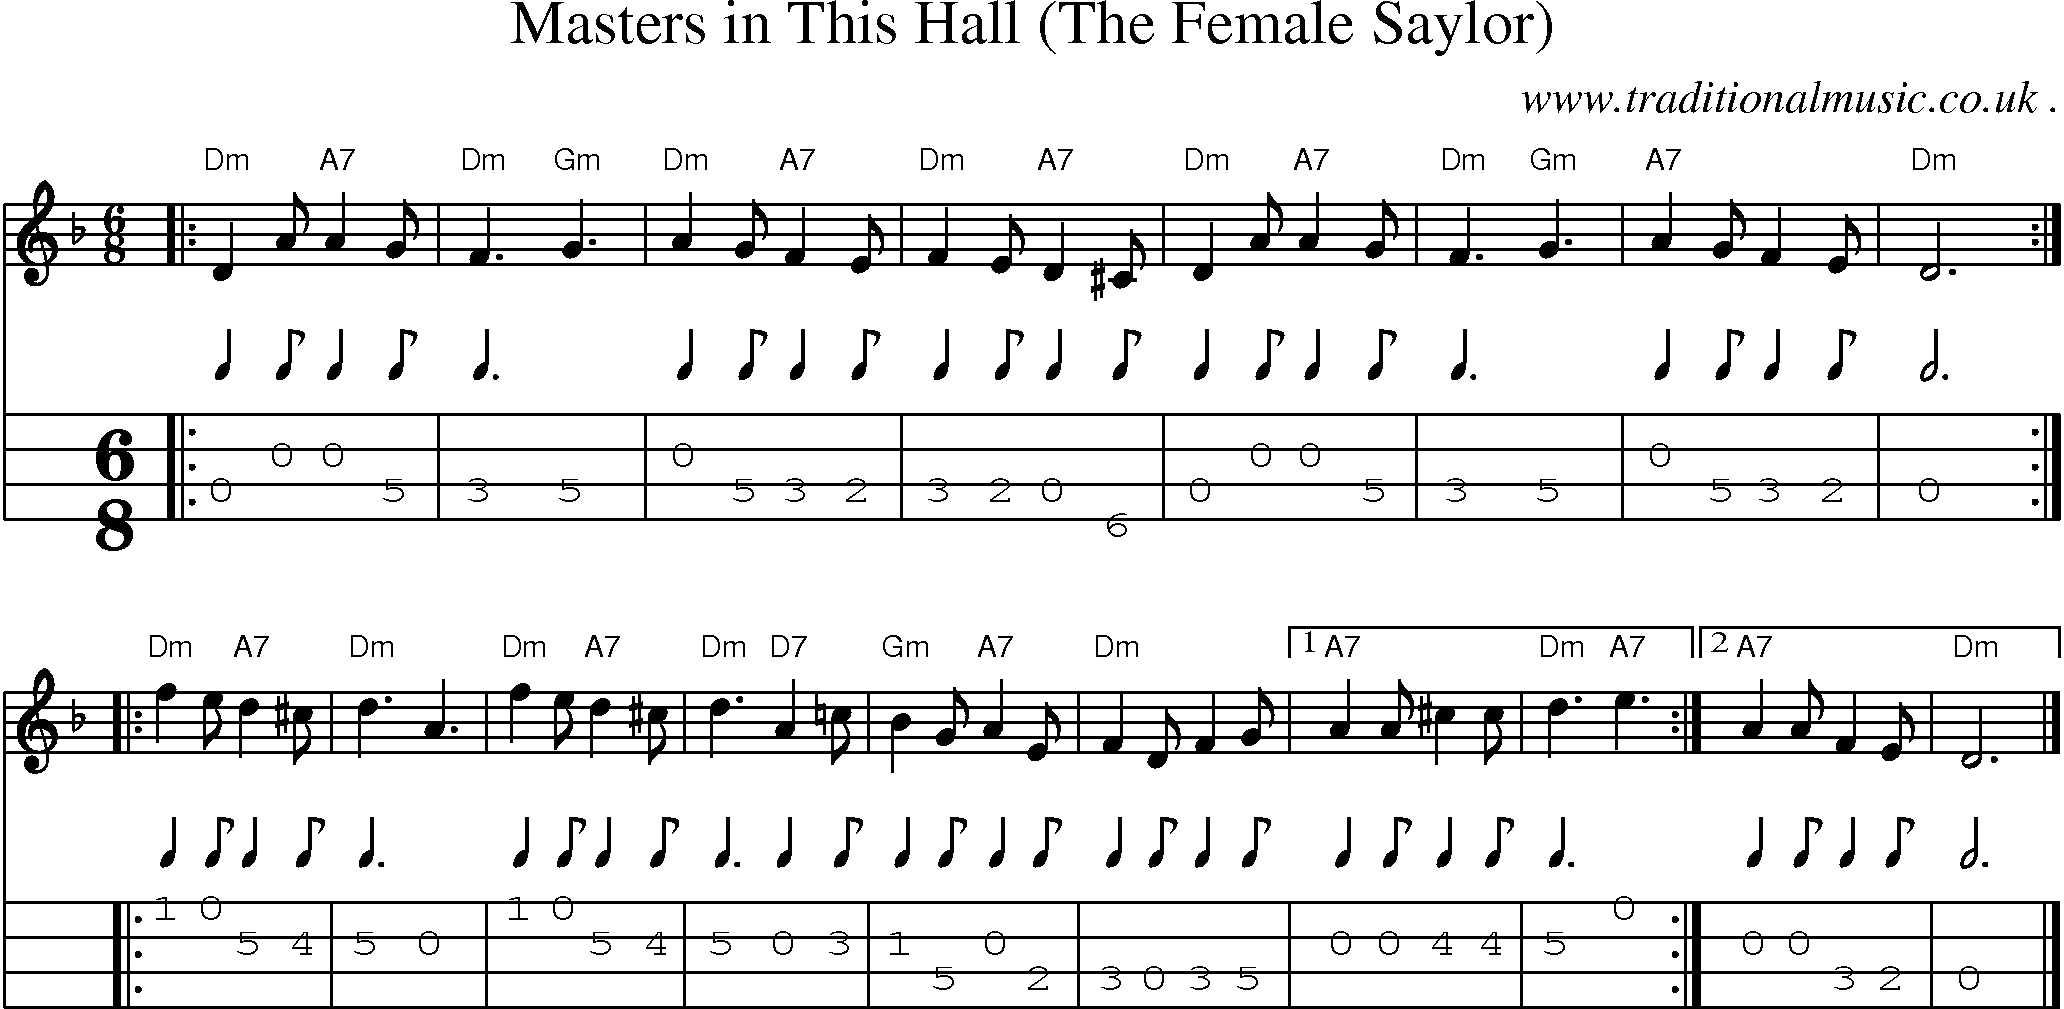 Sheet-music  score, Chords and Mandolin Tabs for Masters In This Hall The Female Saylor